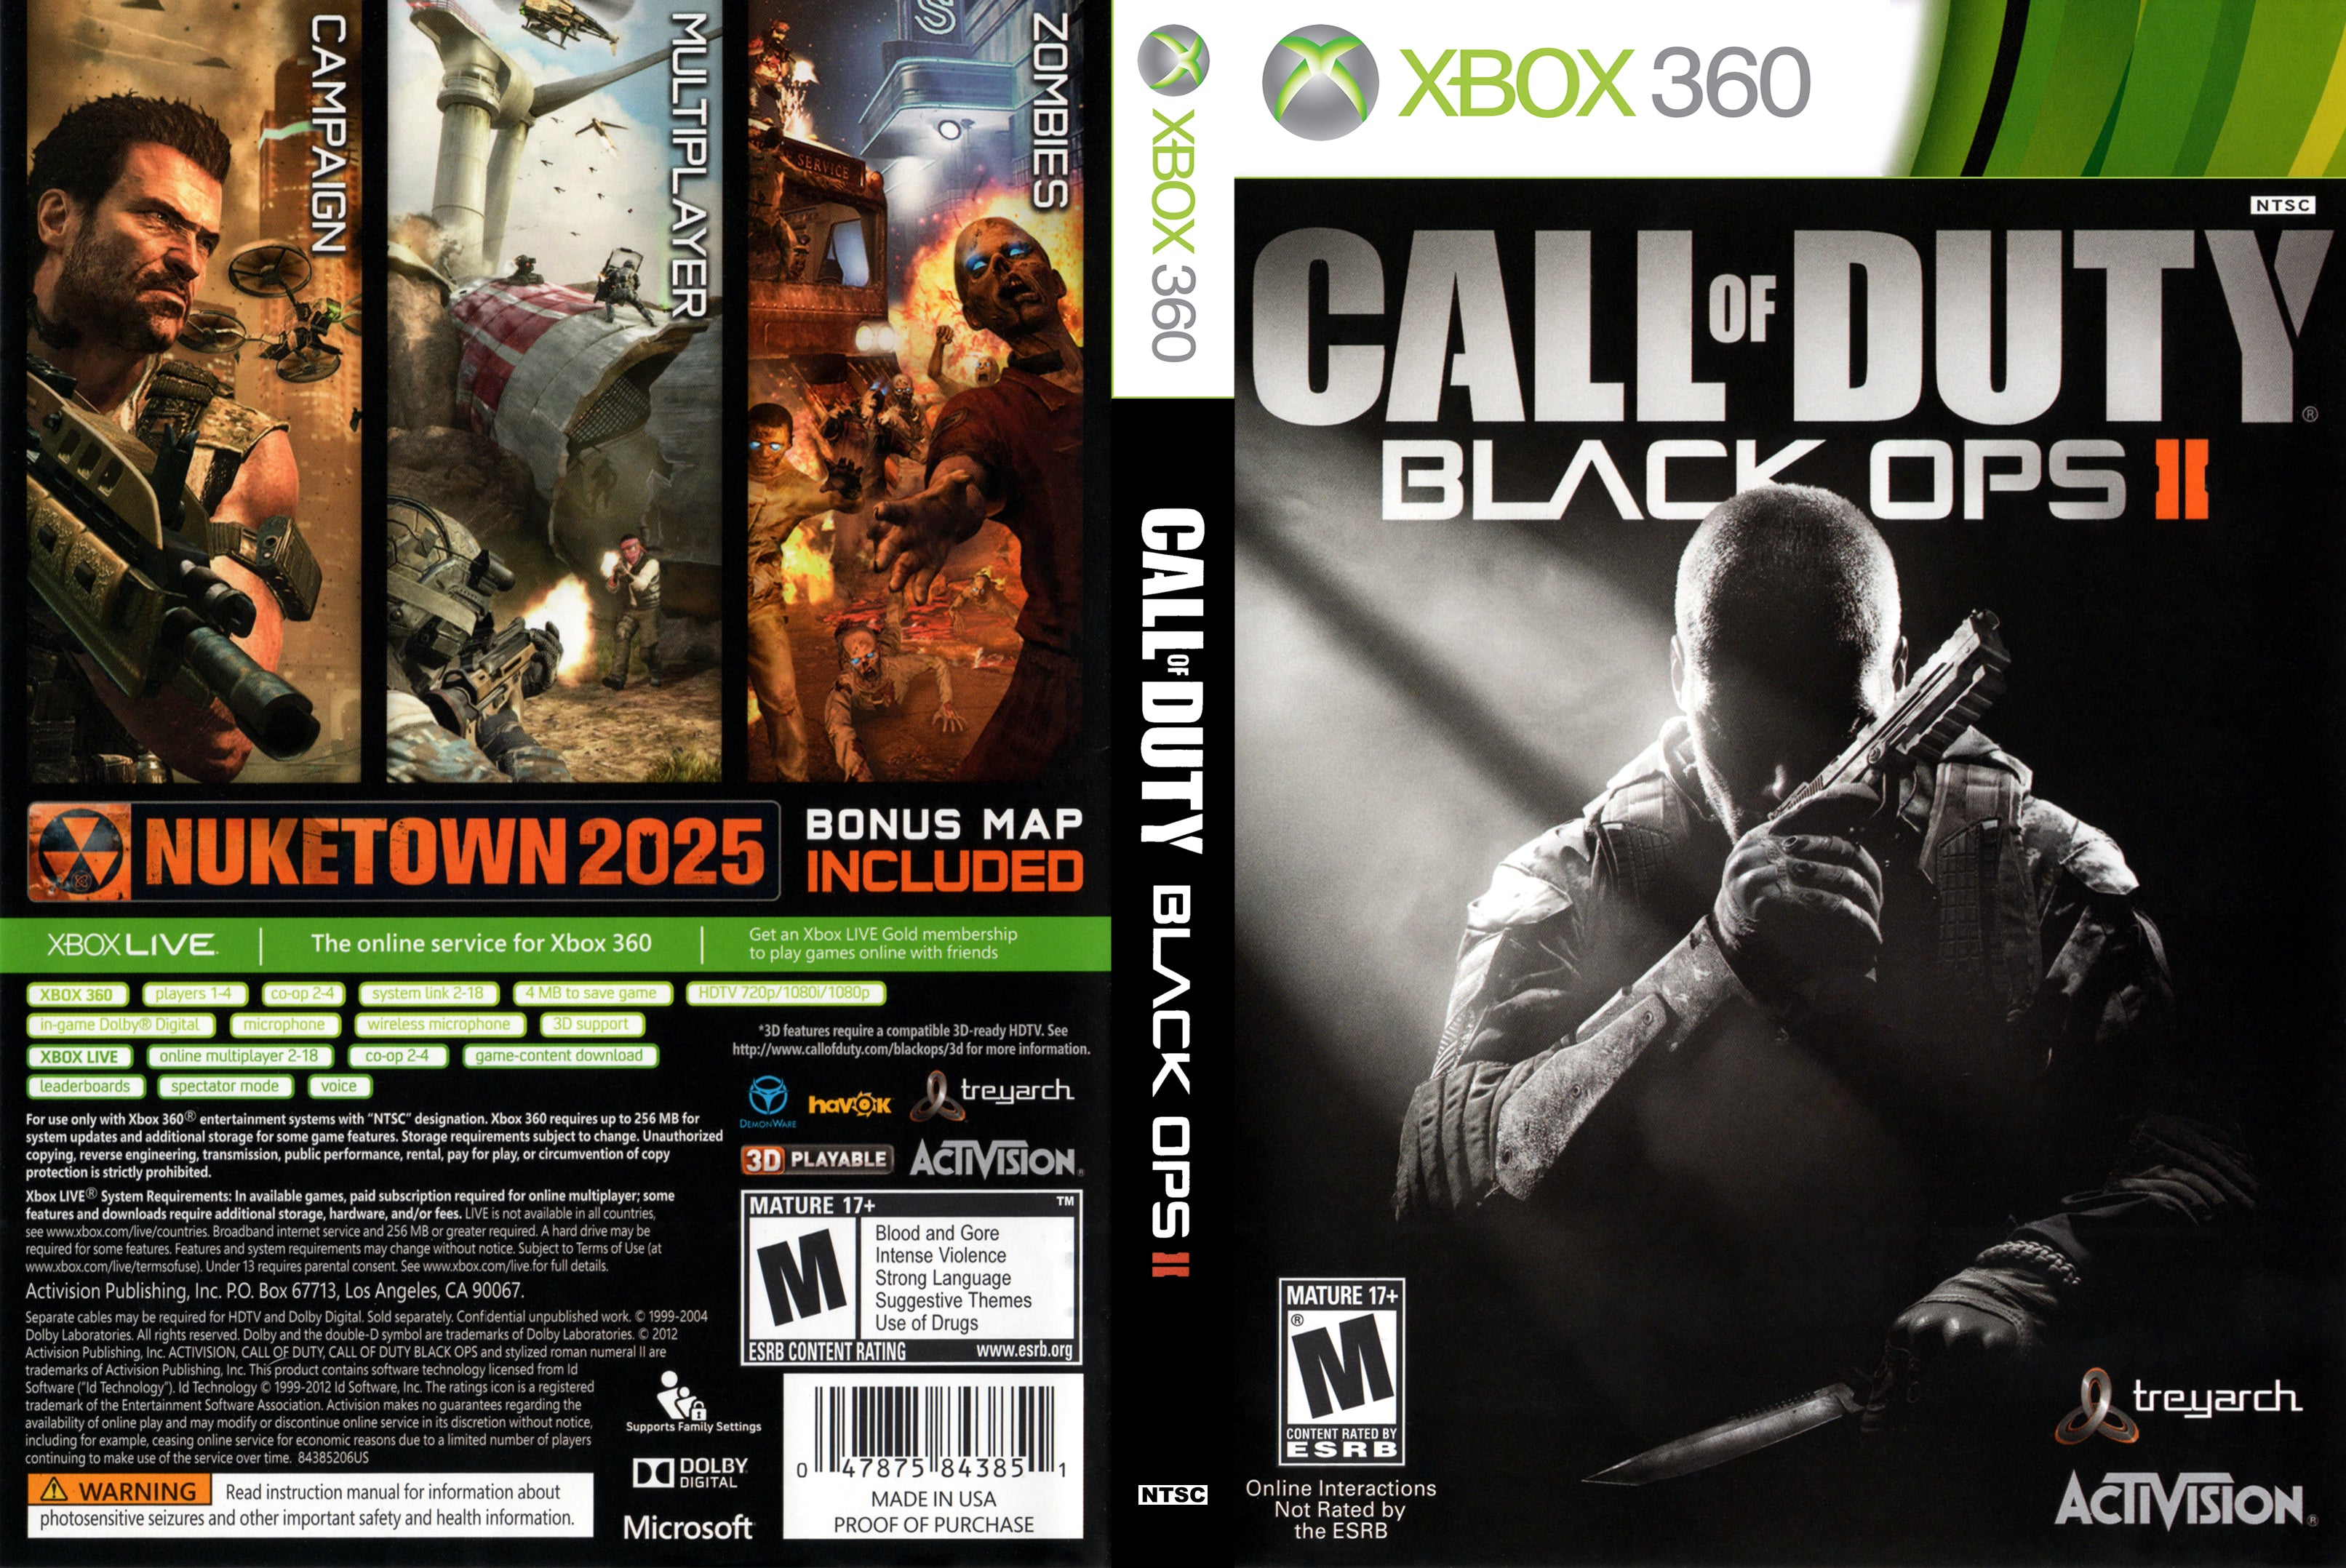 Call of duty xbox game. Call of Duty Black ops на Икс бокс 360. Call of Duty Blast ops 2 Икс бокс 360. Блэк ОПС 2 Икс бокс 360. Call of Duty на иксбокс 360.